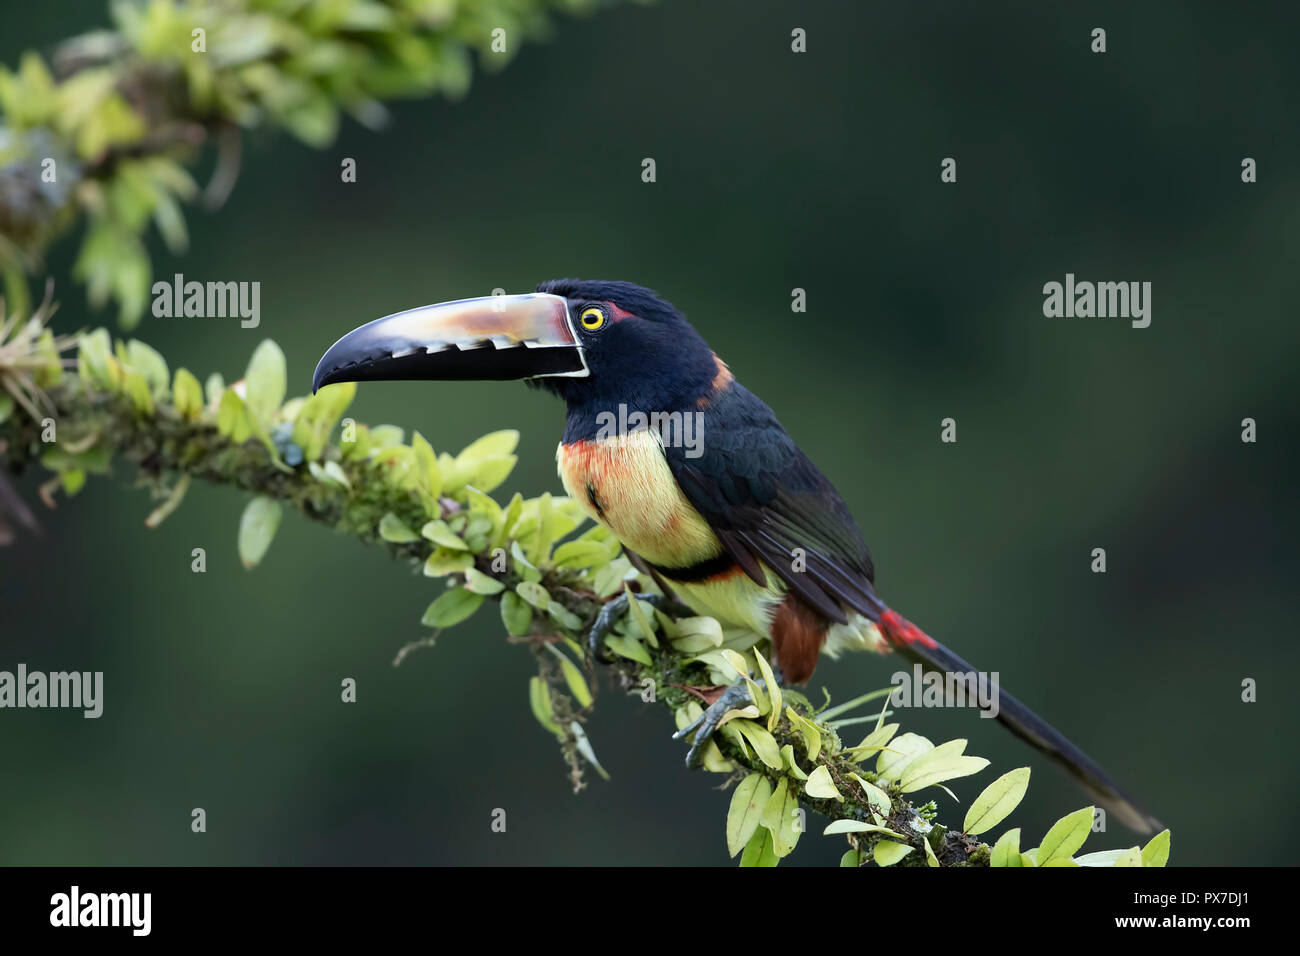 Collared Aracari Toucan (Pteroglossus) perched on a branch in the rainforests of Costa Rica Stock Photo